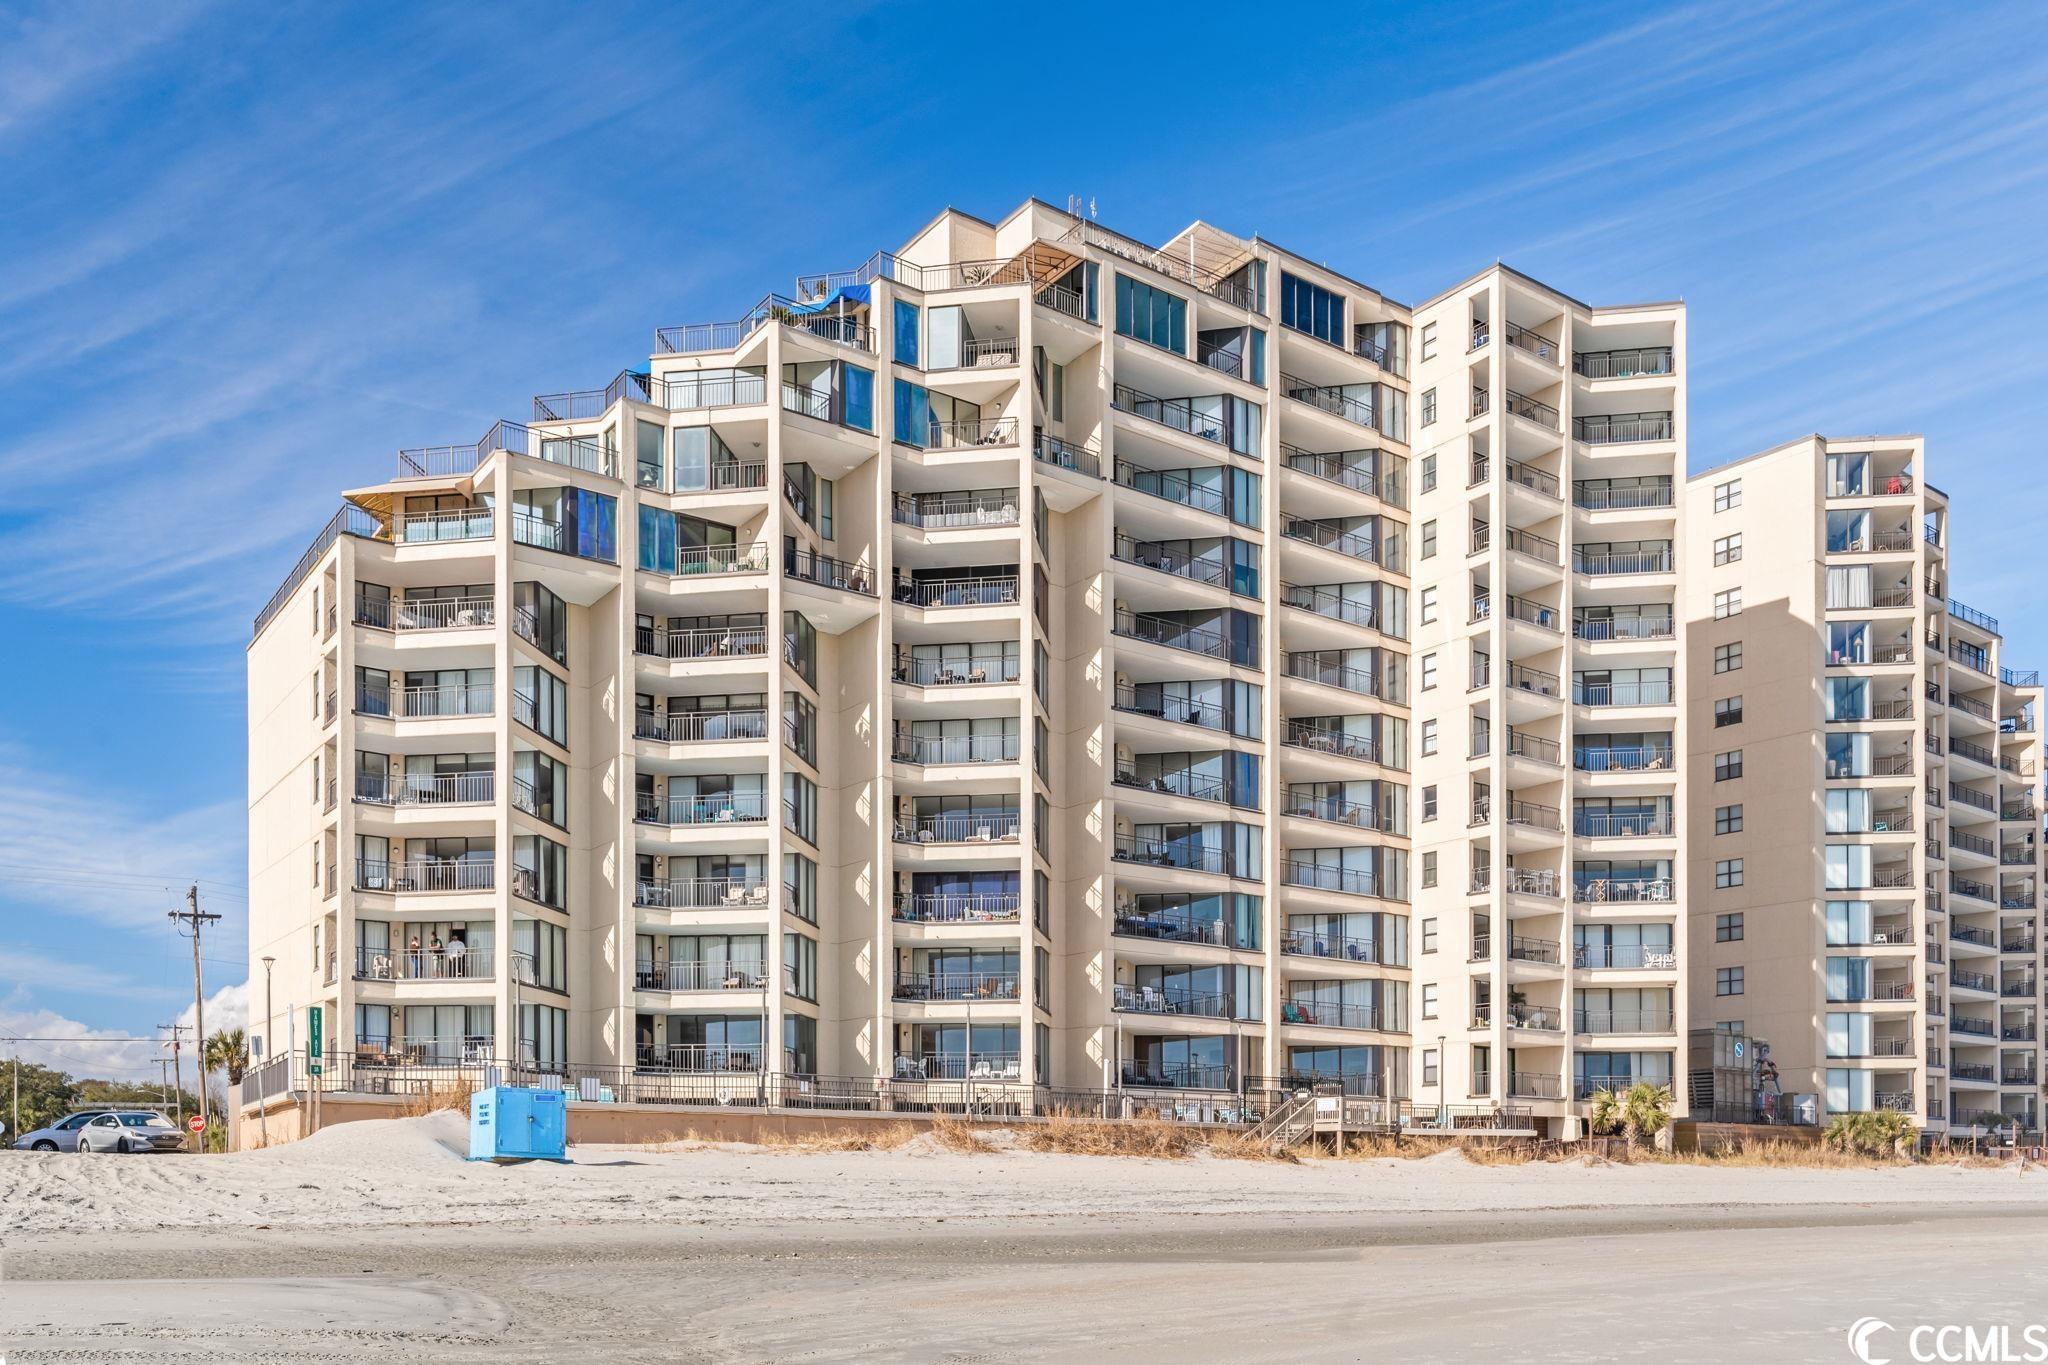 a spectacular oceanfront condo at one of the most popular buildings in garden city beach– surfmaster ii! a beautifully updated 1 bed, 1.5 bath condo with unmatched oceanfront views from the large 7th floor balcony. updated with stainless steel appliances, modern kitchen backsplash, fresh paint on the ceiling & walls, shiplap accent, modern bathroom vanity, newer living room, dining room & bedroom furniture including mattress, new washer/dryer, newer hvac, beachy décor, wall art and more! enjoy this coastal getaway for the weekend, for the season or all year! access to the condo is super easy with multiple elevators and plenty of garage parking. outdoor pools, hot tubs, oceanfront property and expansive views from unit 713 provide amazing opportunities for enjoying the sunrise, shoreline, beach activities and more! enjoy the waves crashing and the palm trees swaying in the breeze in the new fitness center/ club house for owner use coming soon! invest in one of the most popular oceanfront buildings in garden city beach – surfmaster ii – known for superb rental demand and the perfect location in garden city beach! the best vacation spot & rental property is for sale now @ surfmaster ii unit 713! don’t hesitate!